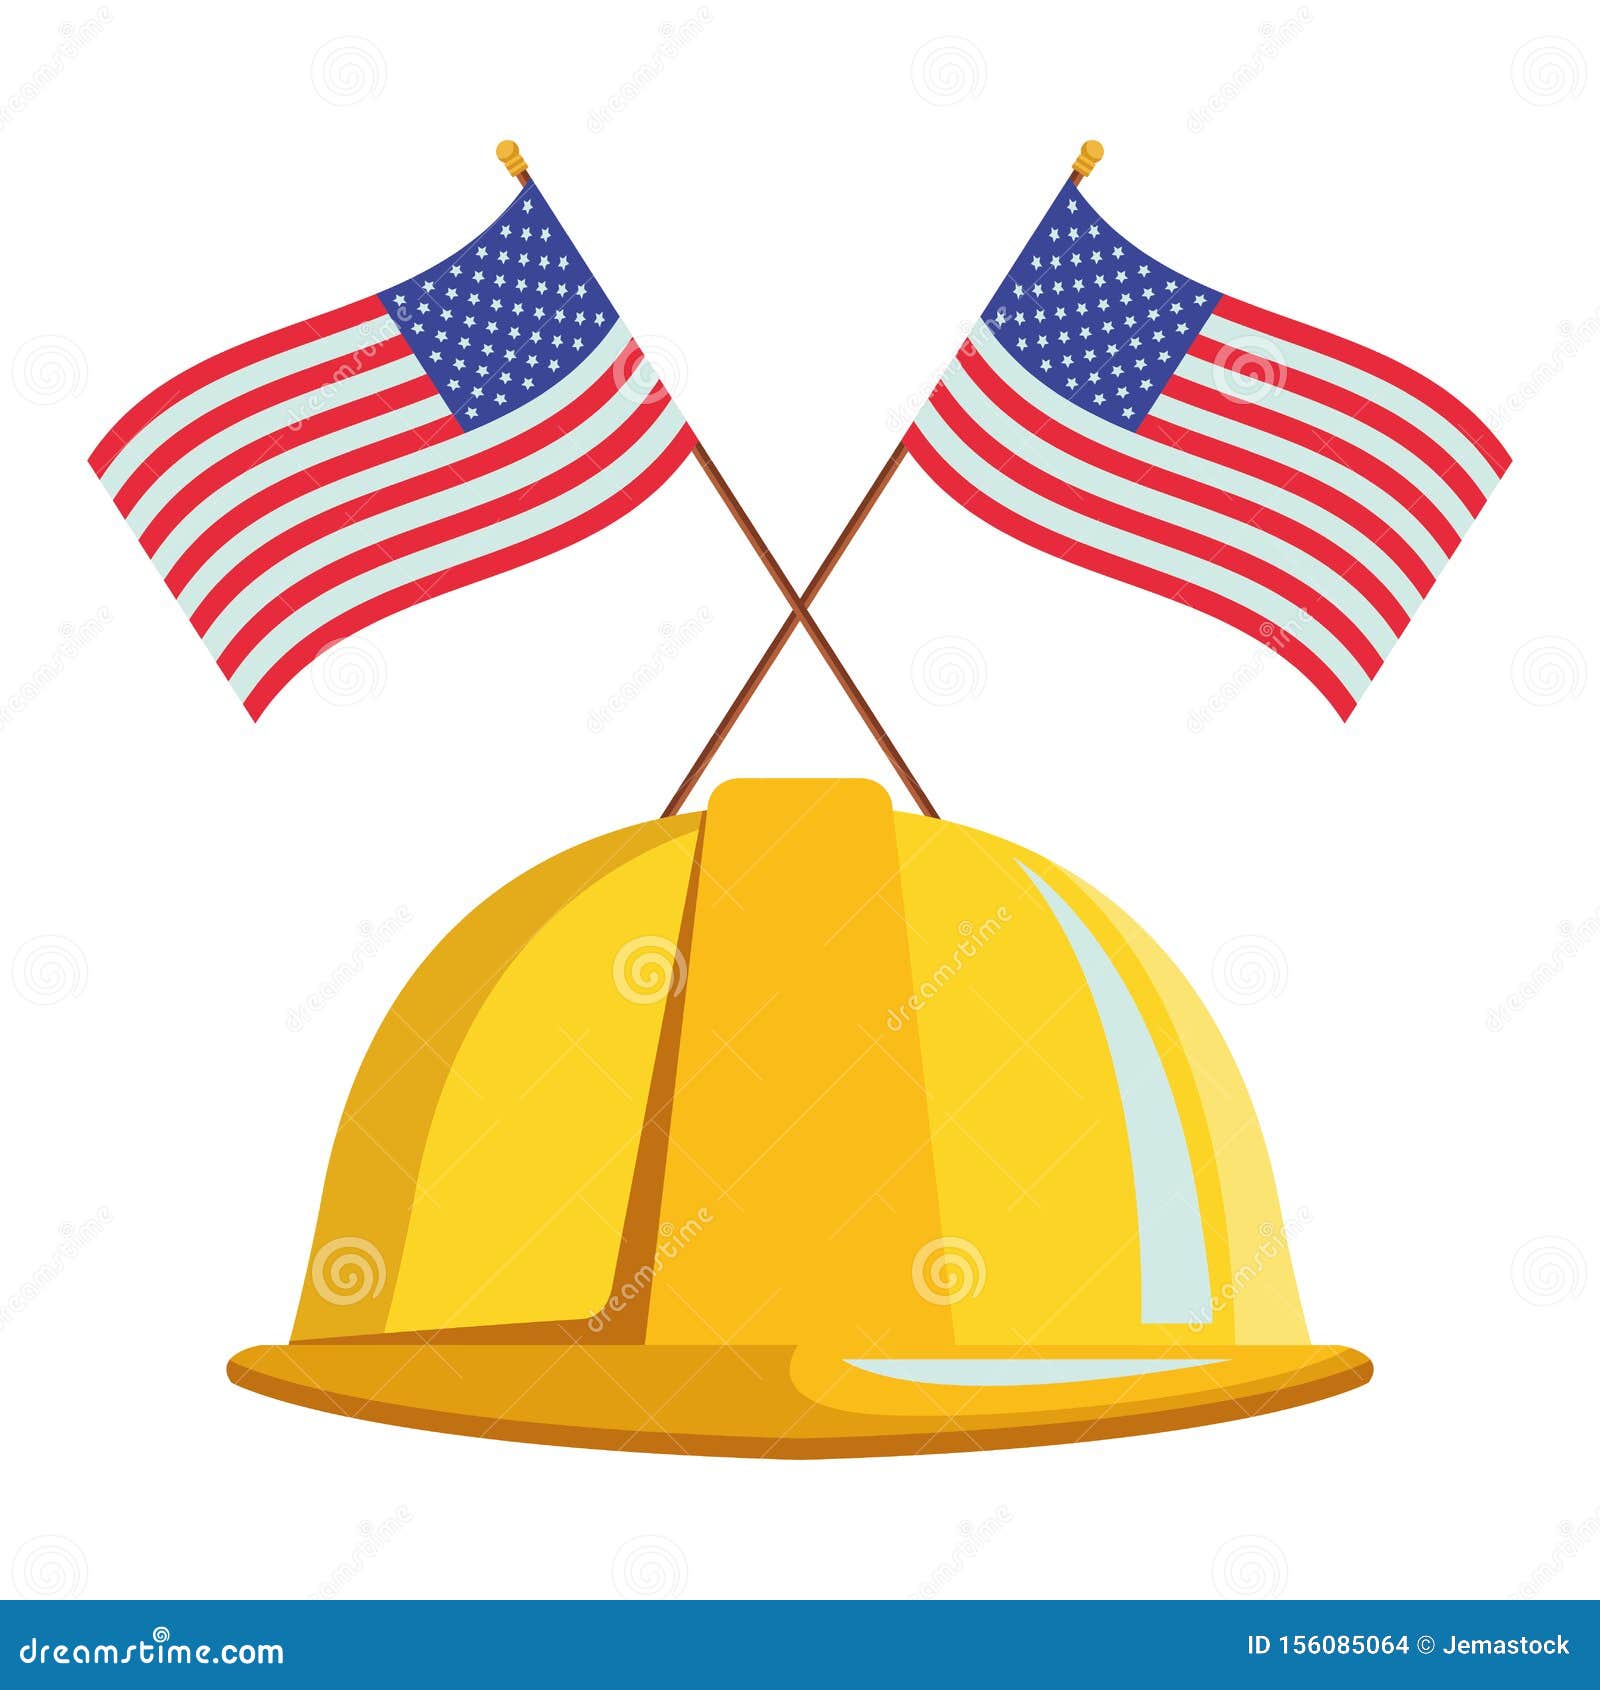 Construction Helmet with United States Flags Stock Vector ...